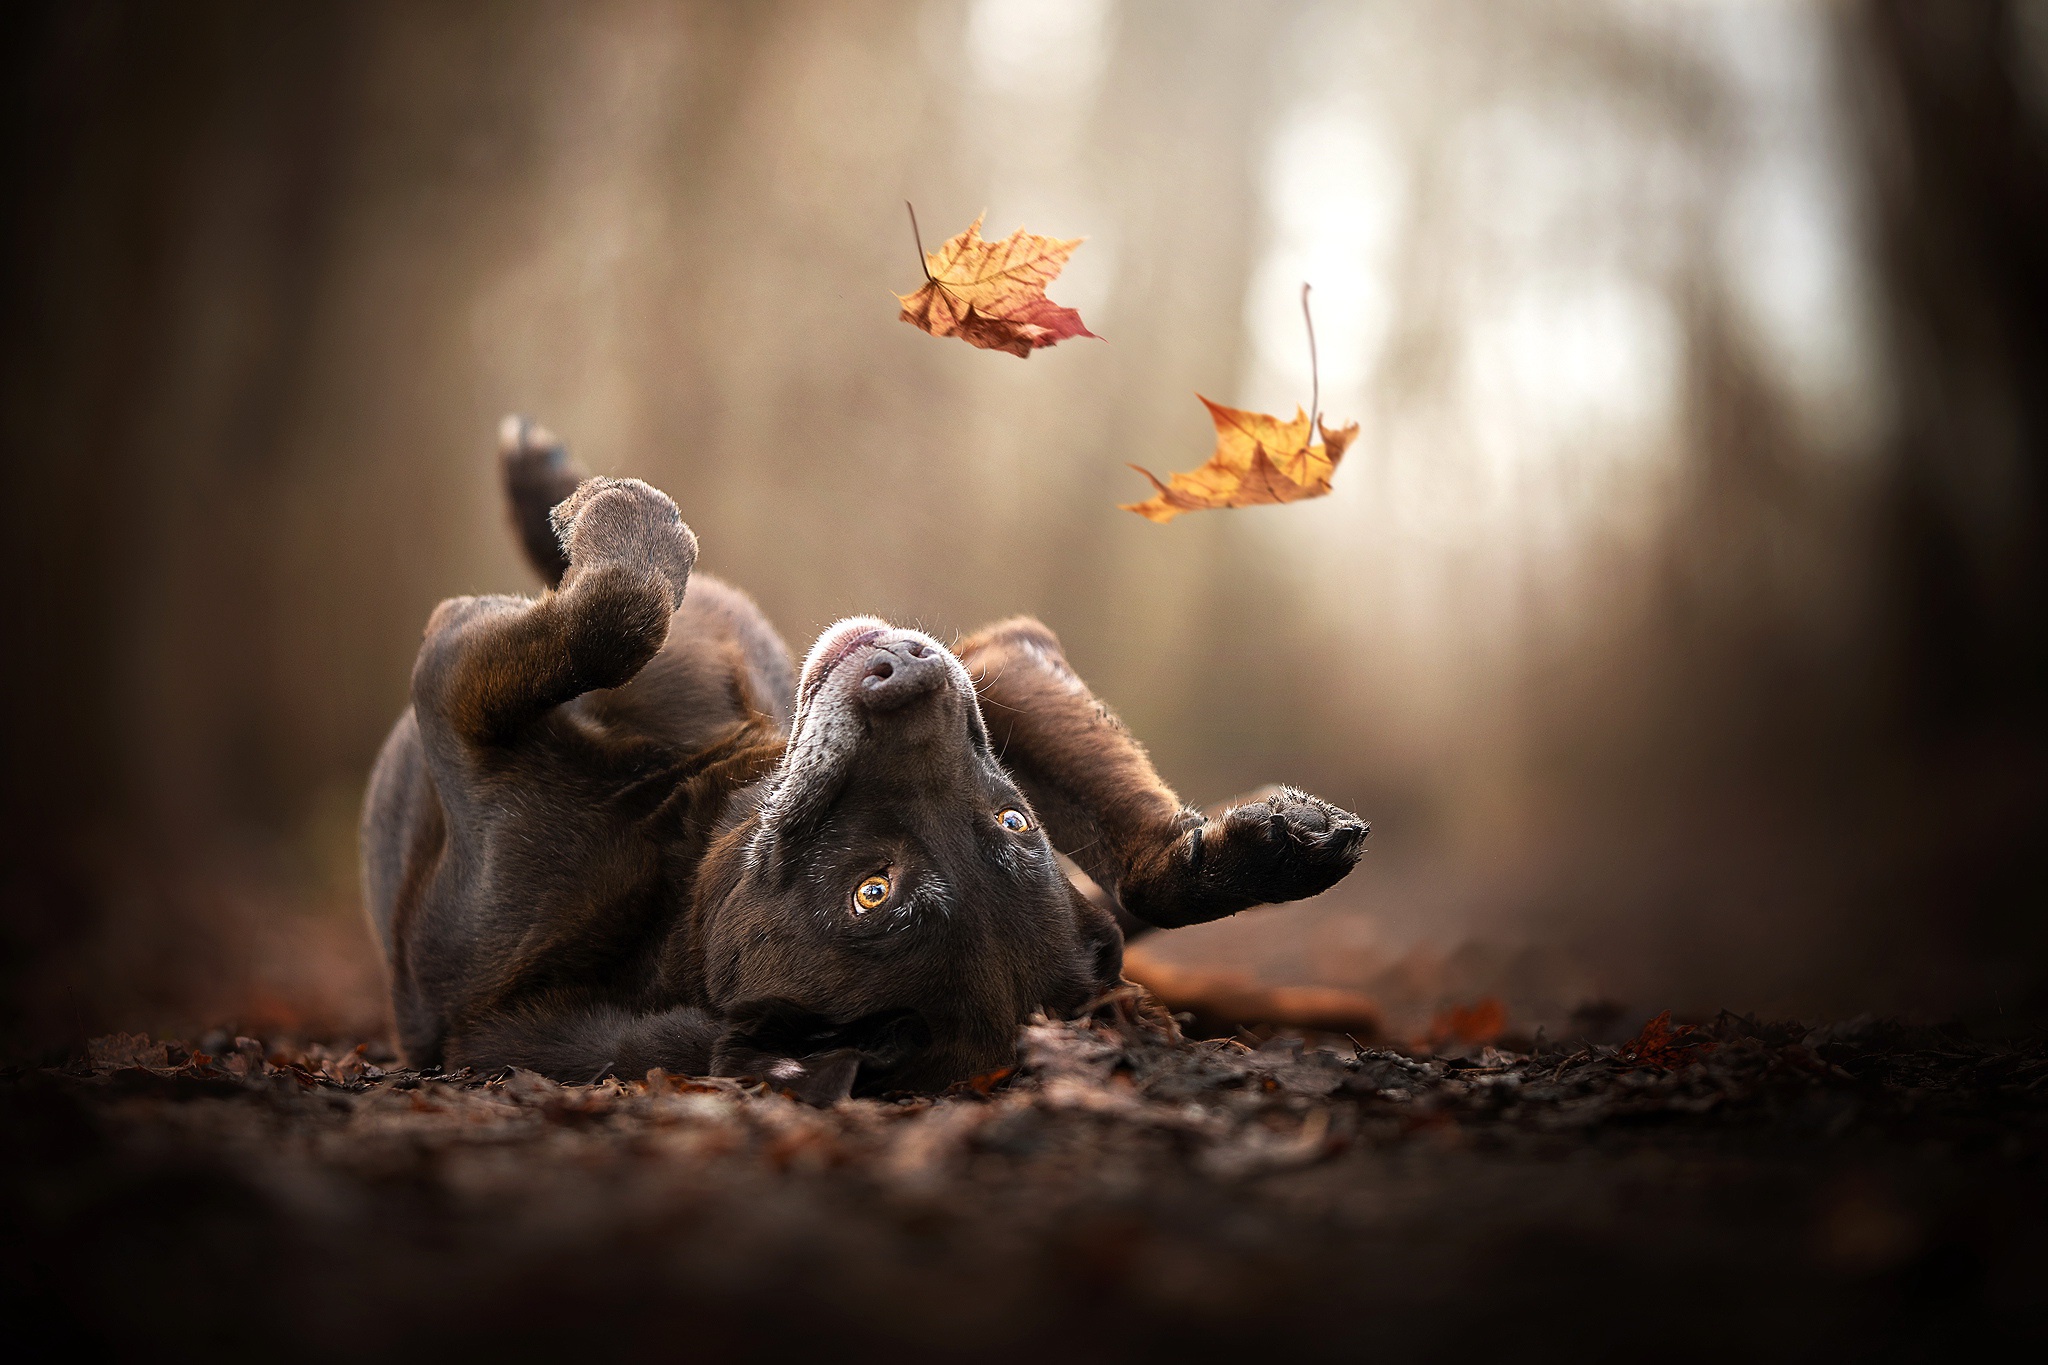 General 2048x1365 dog outdoors leaves animals